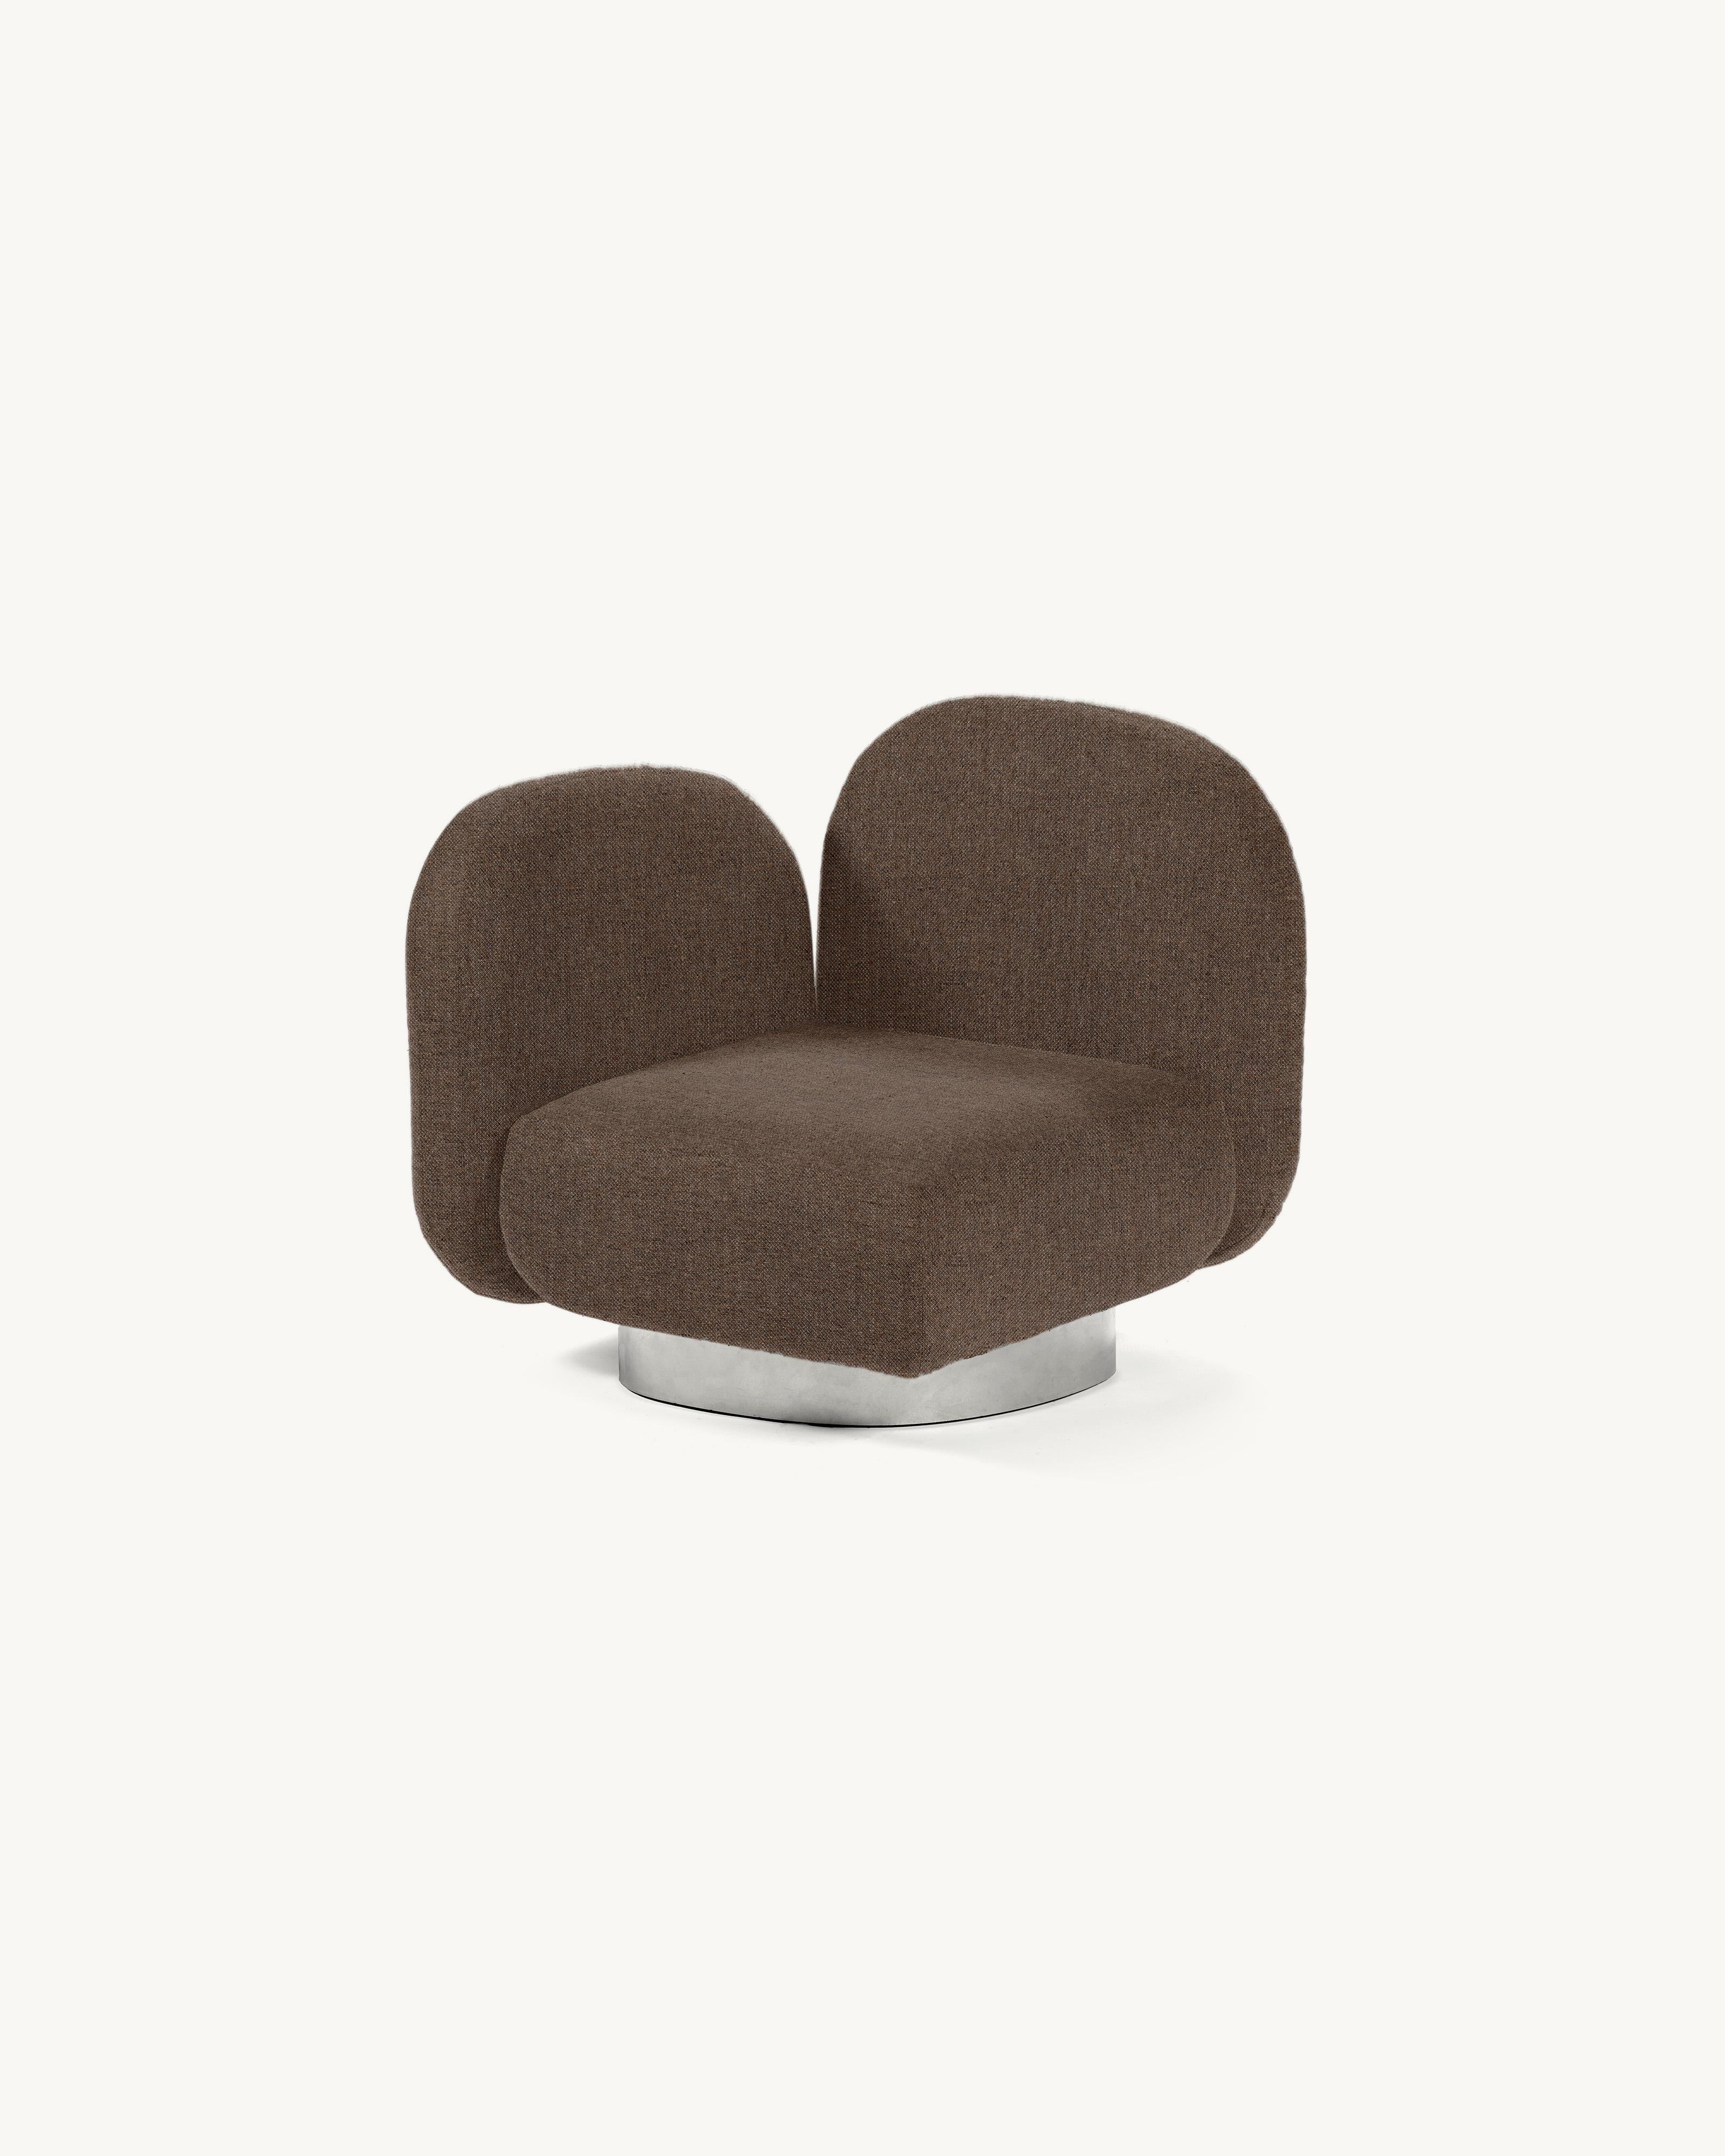 Lounge Chair / Corner Assemble 
Designed by Destroyers/Builders x Valerie Objects
Upholstery: Sevo Rust
Code: V9020314

Dimensions: L 87 W 88 H 85 CM (SH 40 cm)
Materials: Wood, aluminium and upholstery

The ASSEMBLE sofa encourages exactly what its